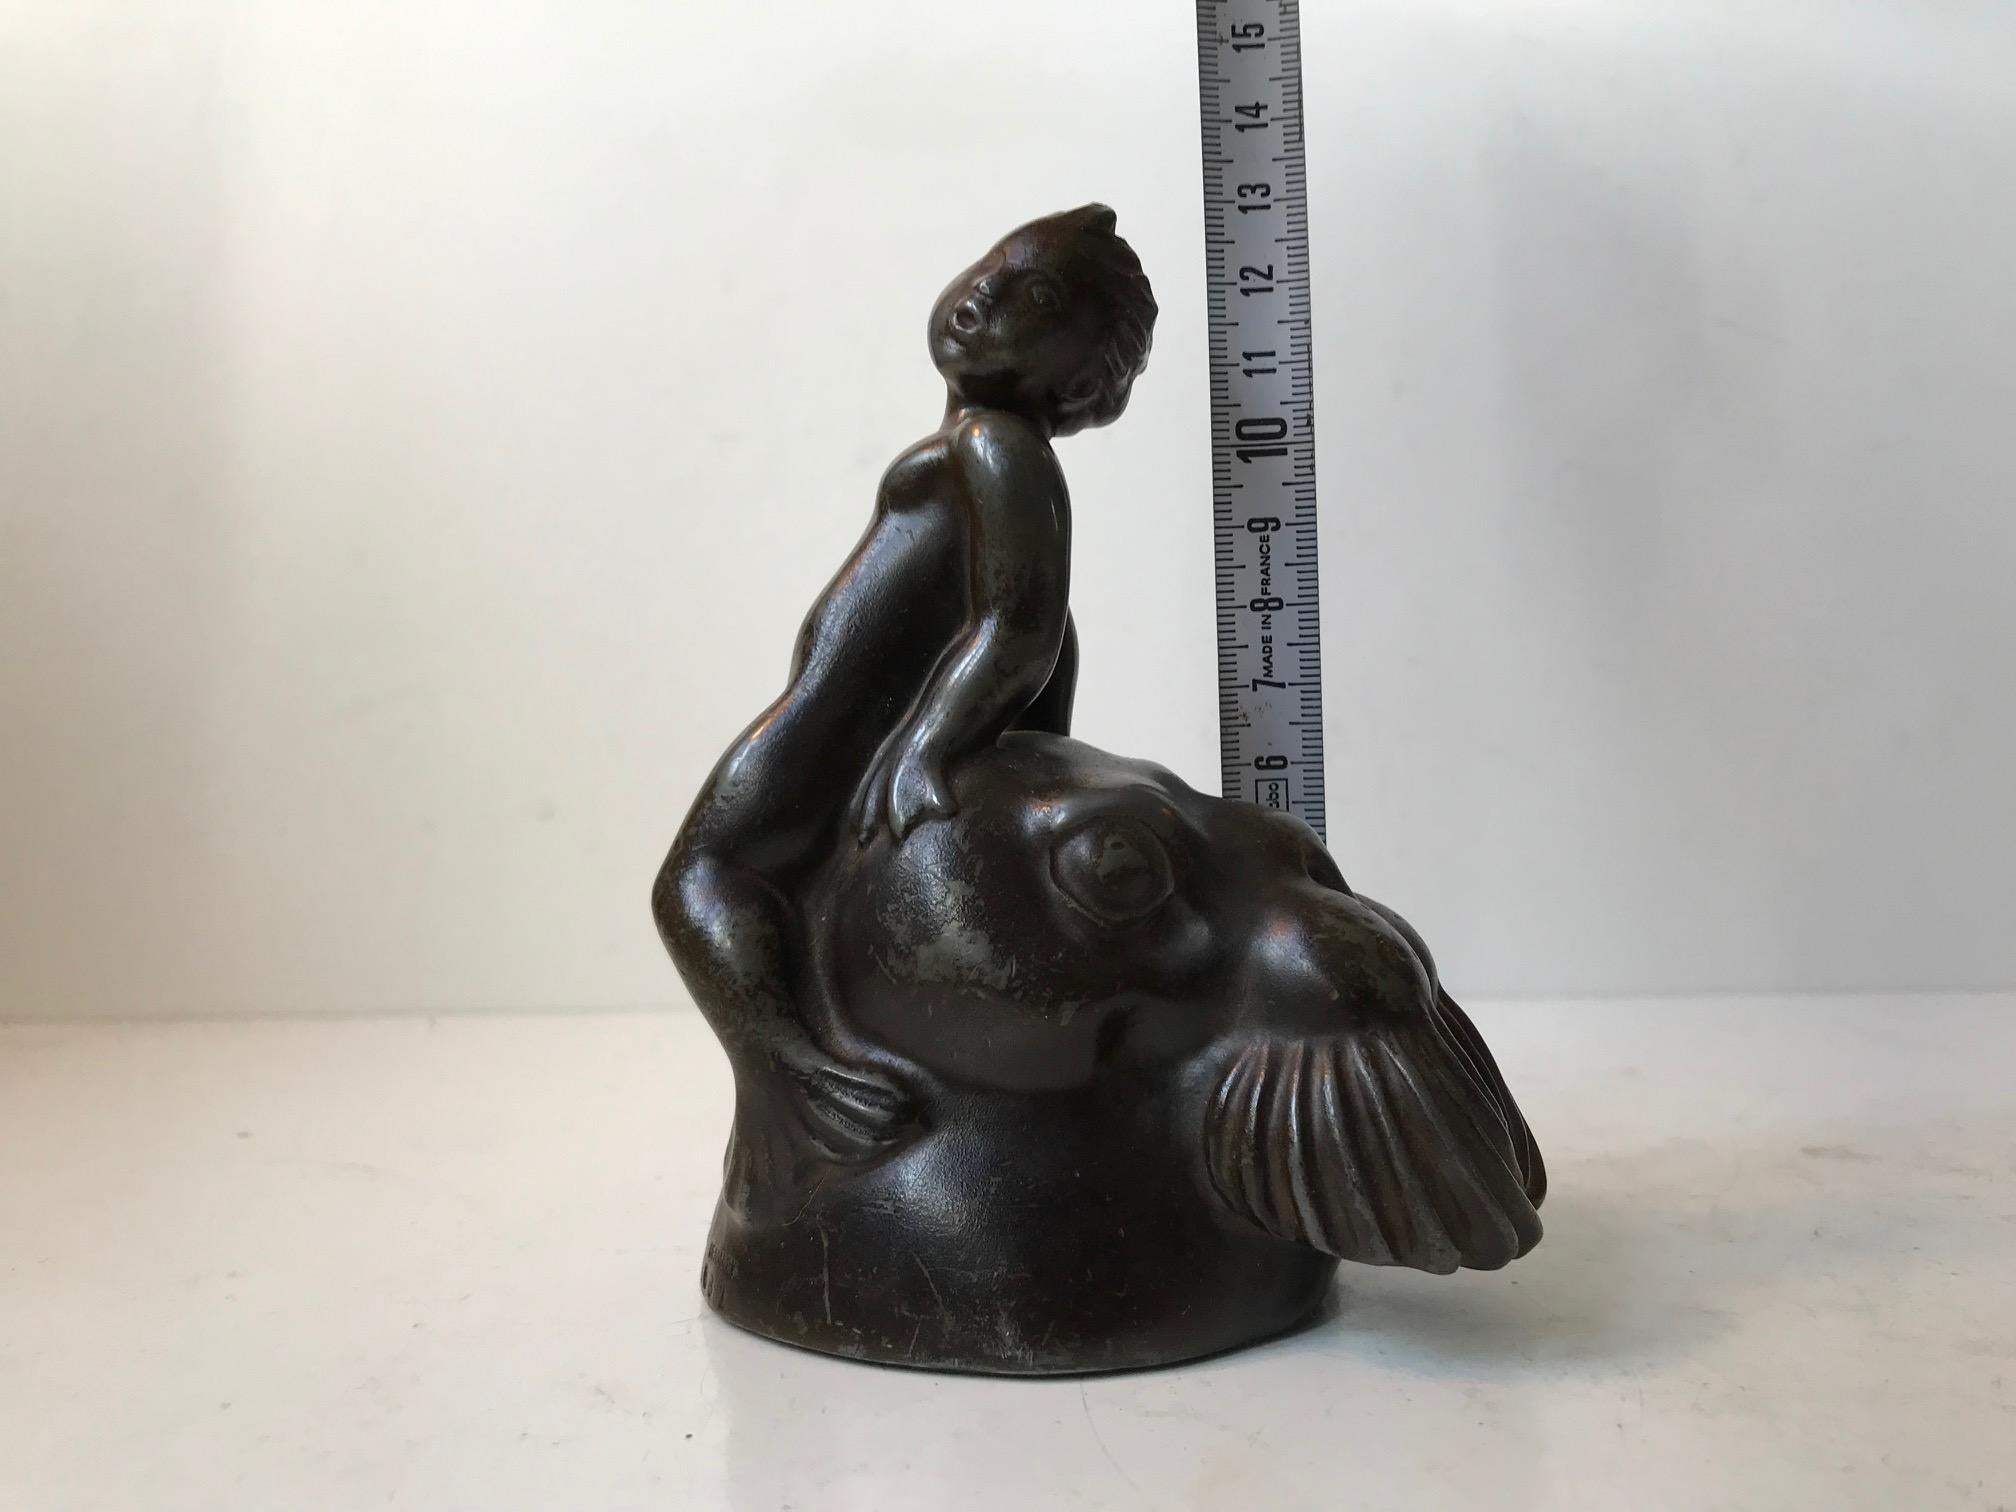 Danish Mythological Diskometal Figurine with Walrus & Faun by Just Andersen, 1930 For Sale